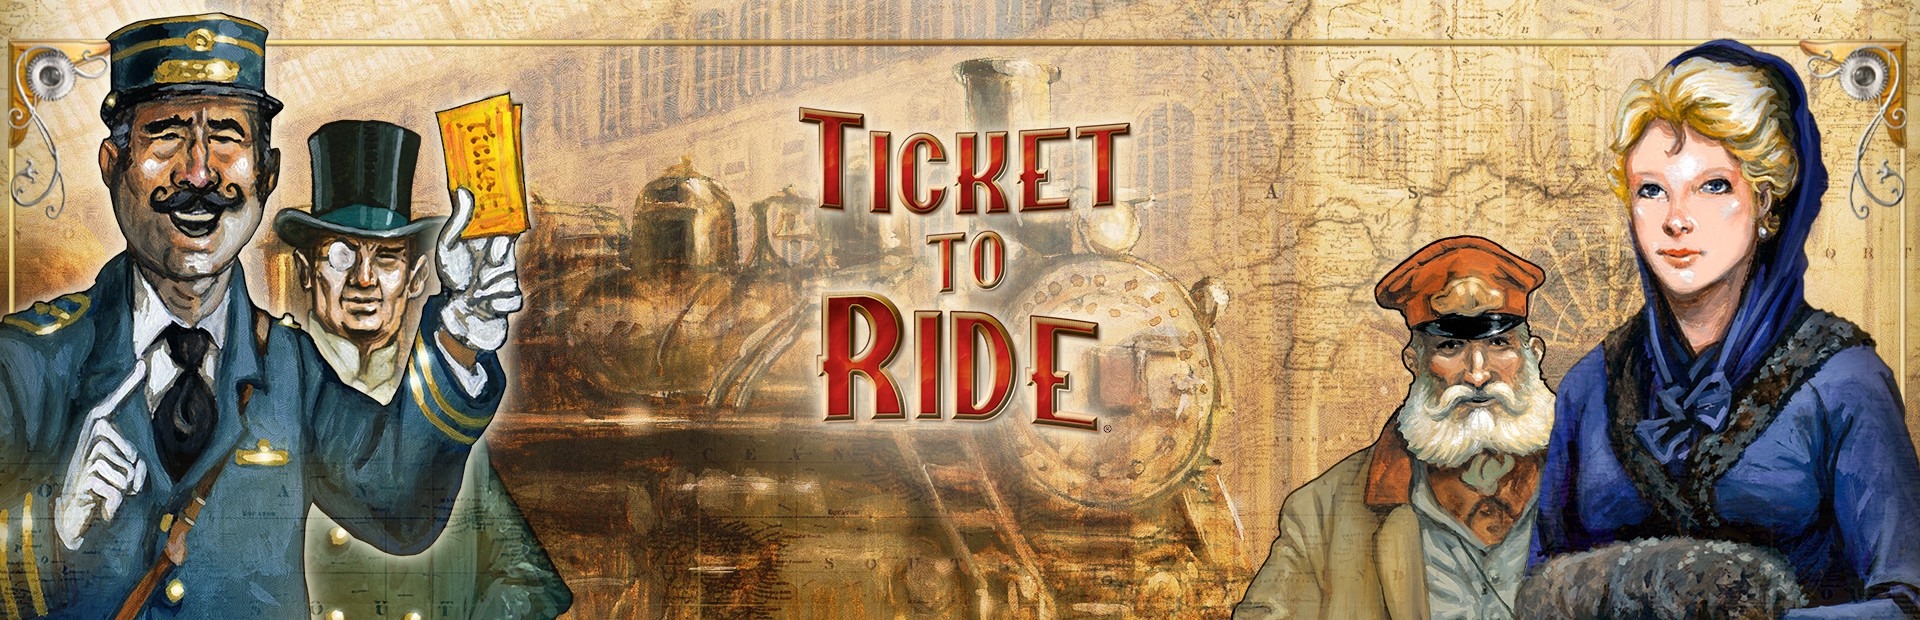 Ticket to ride steam фото 48